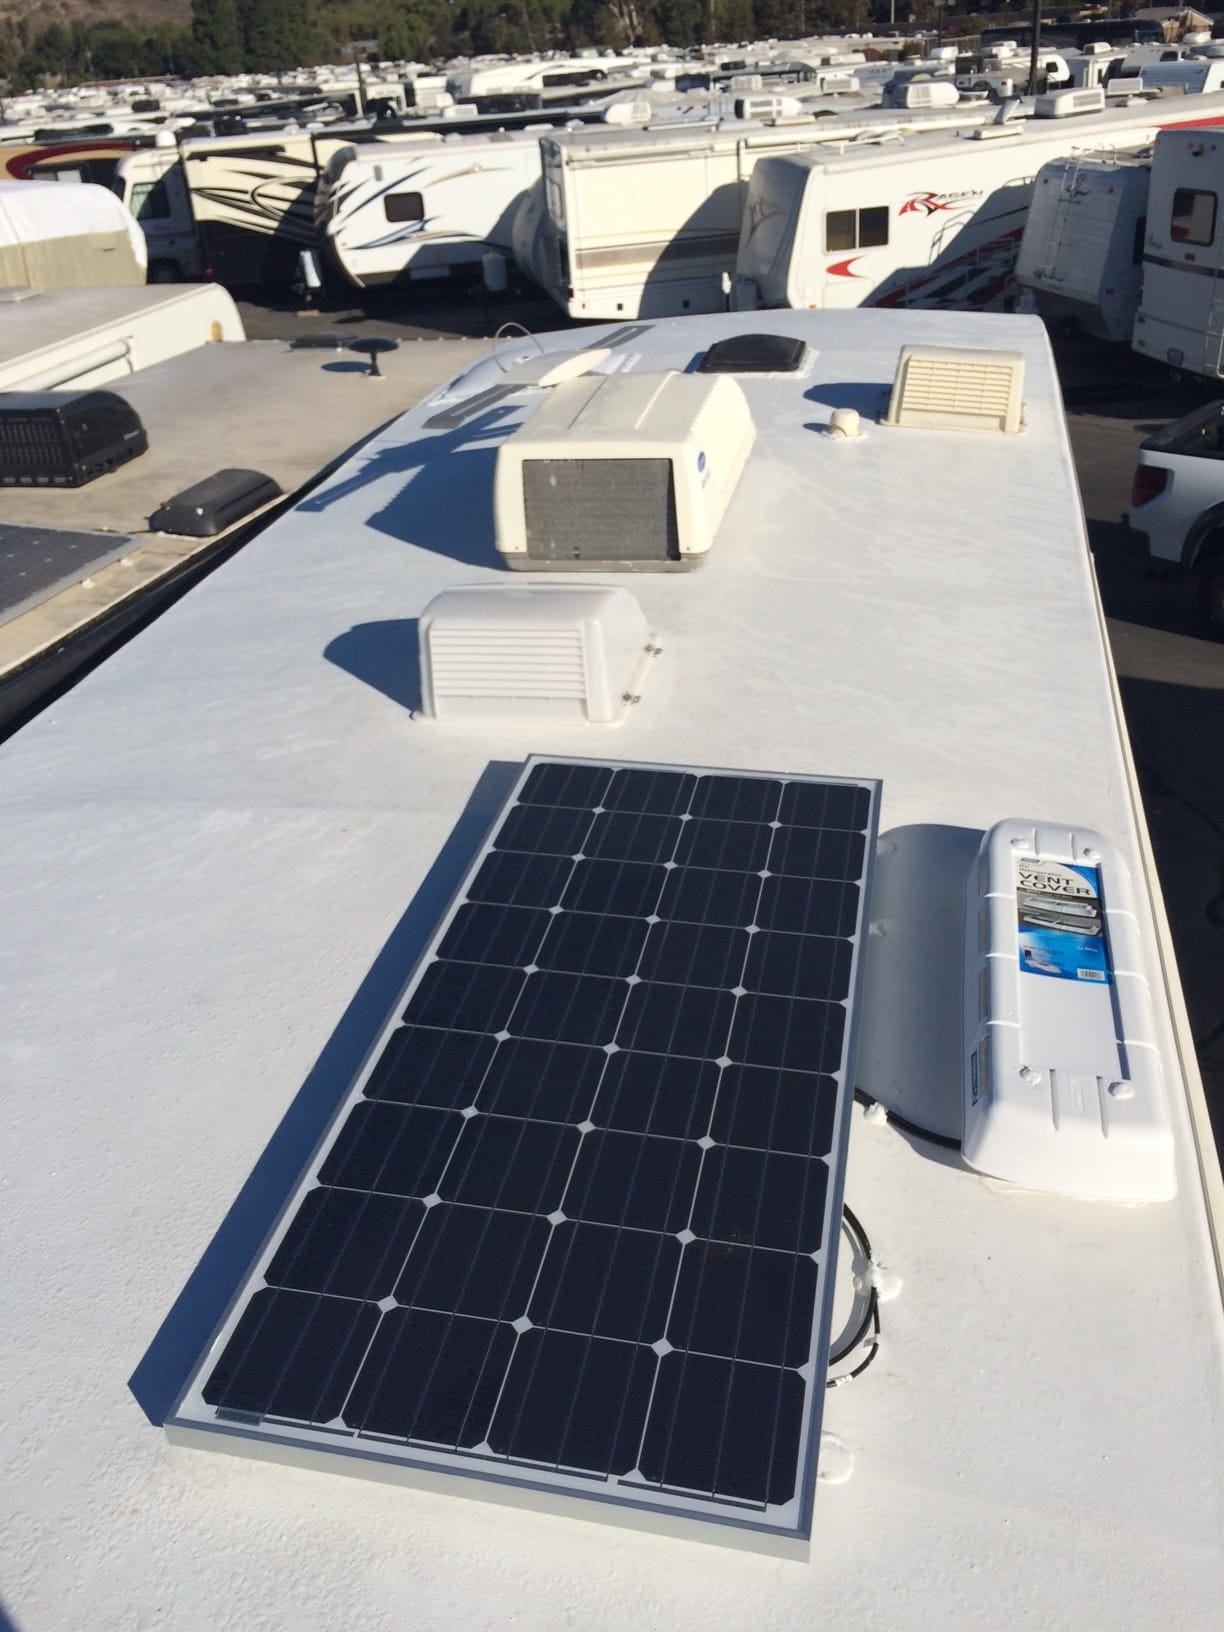 RV Solar Panels The Best Option for Bringing Power to California RVs